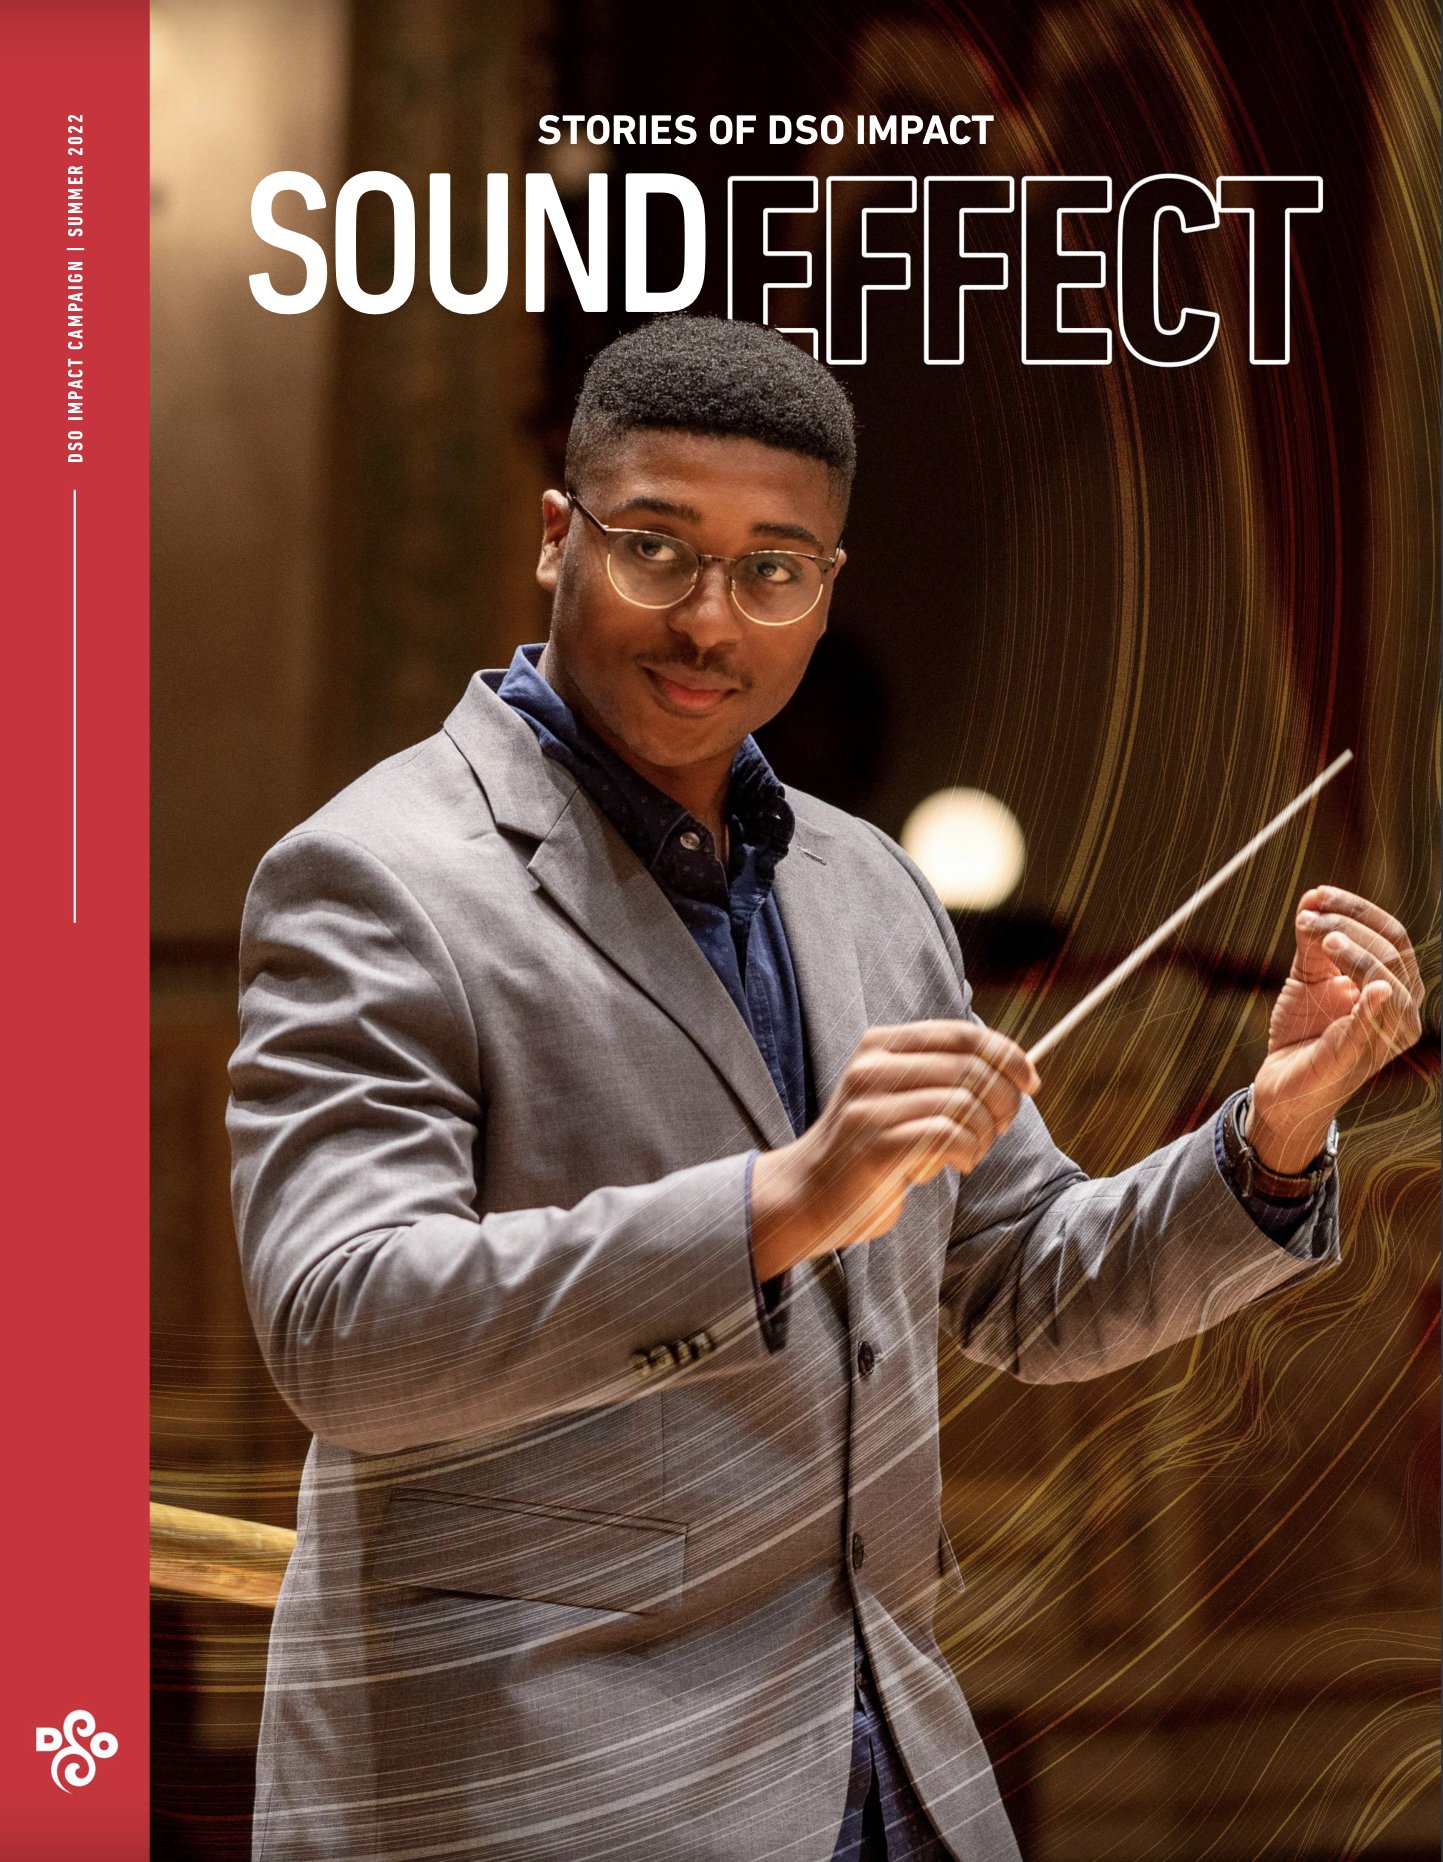 Sound EFFECT: Stories of DSO Impact